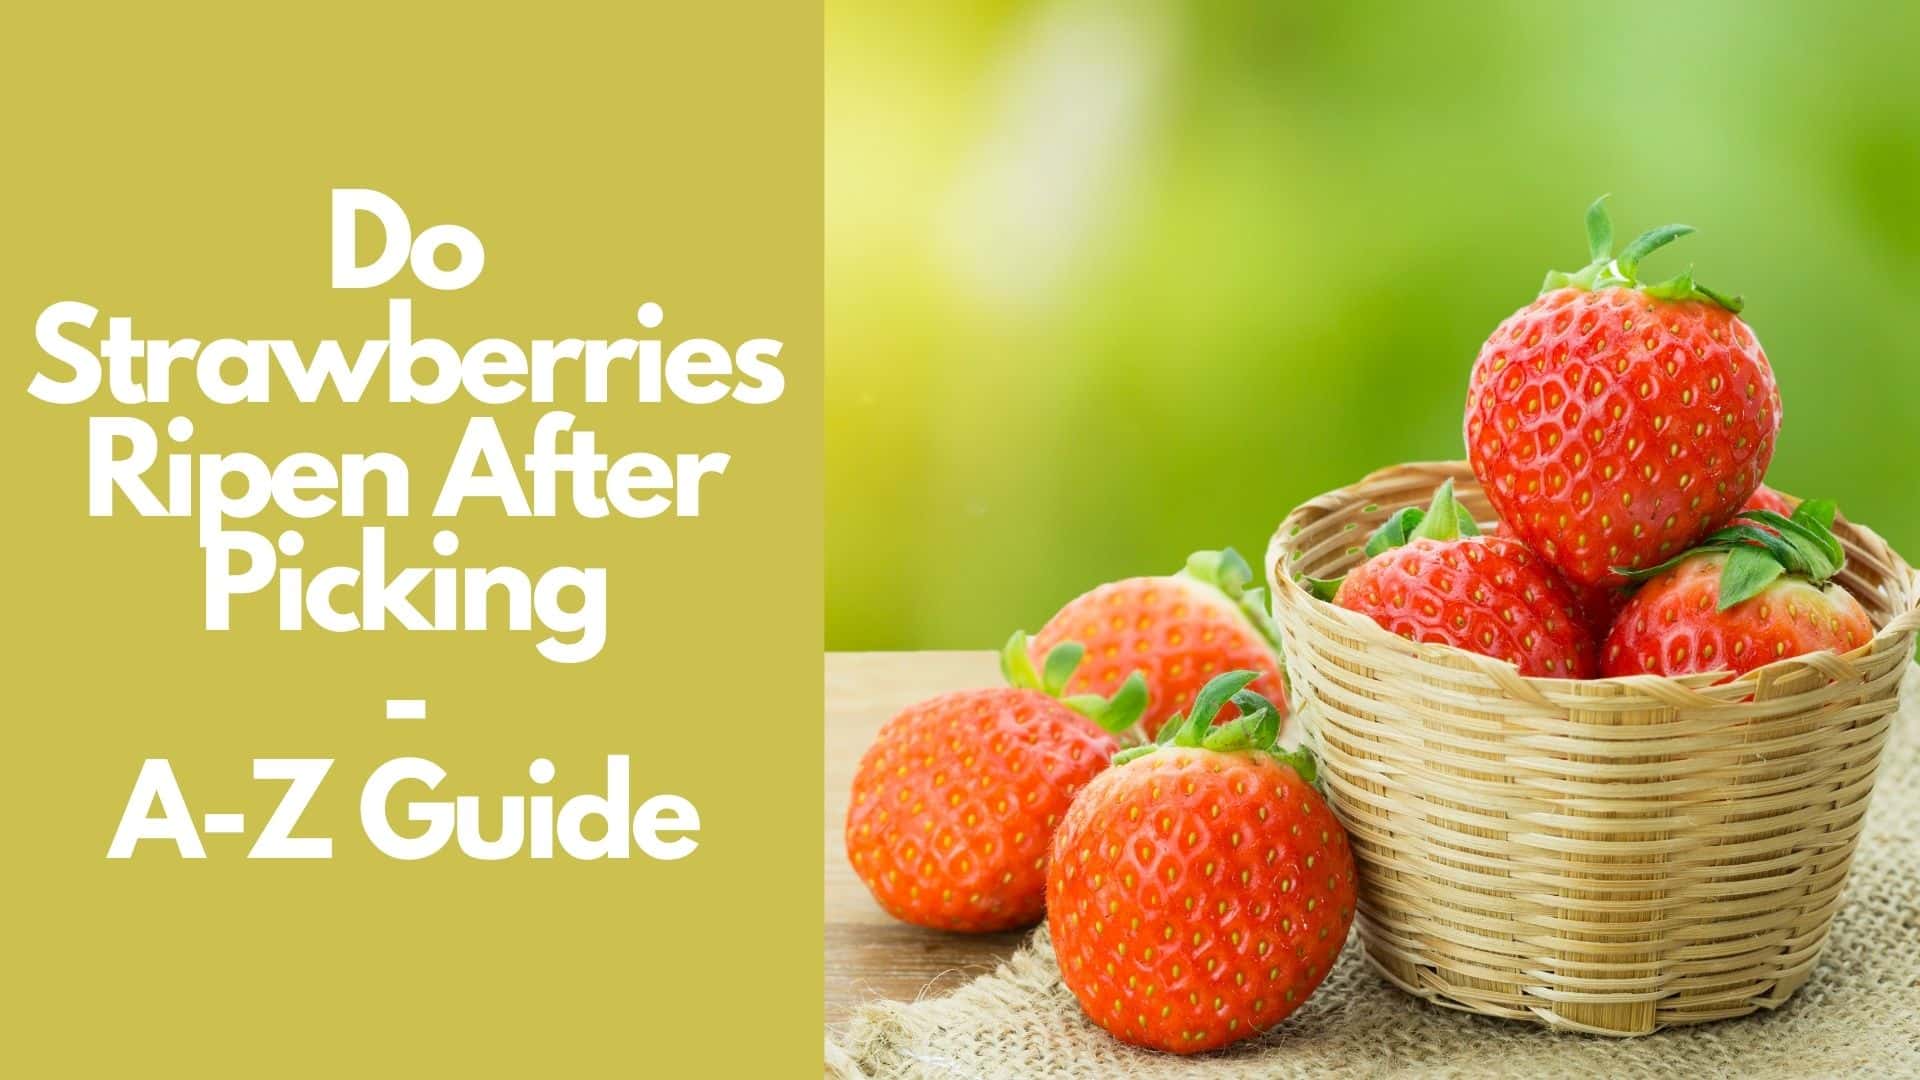 Do Strawberries Ripen After Picking: A-Z Guide